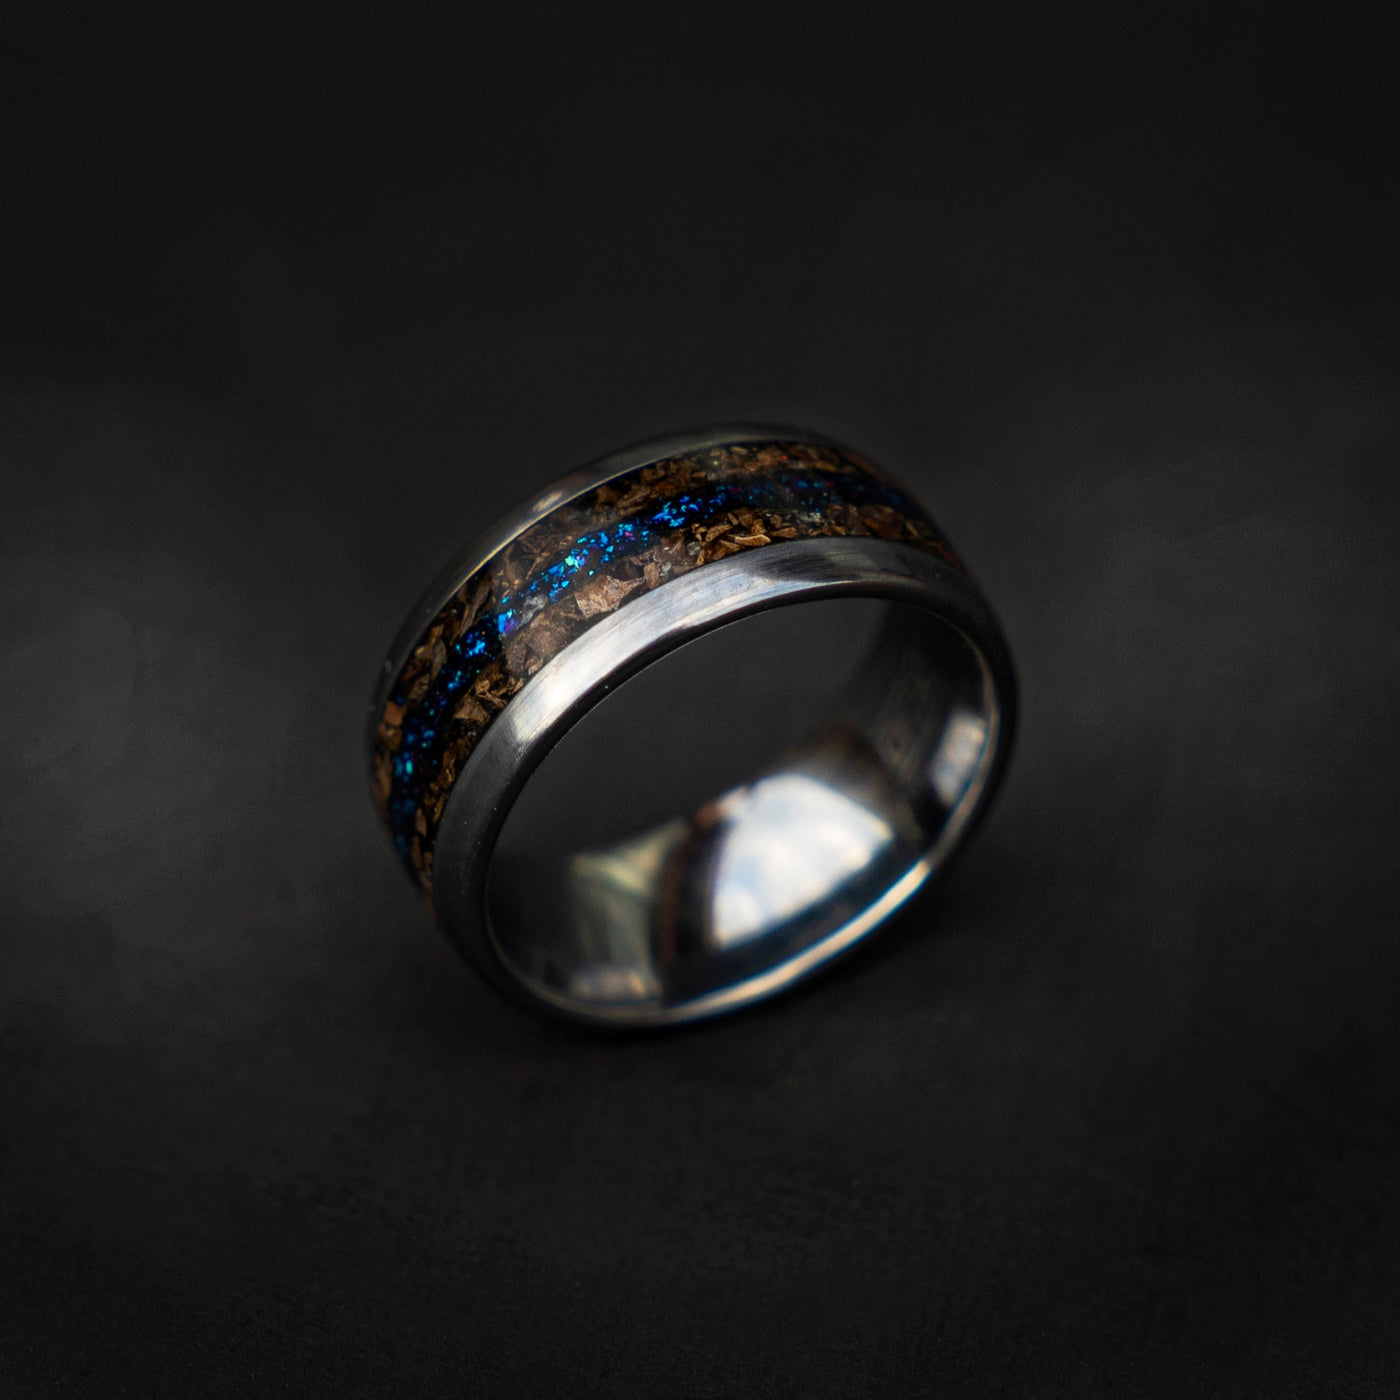 Velociraptor fragments with a blue galaxy opal river, handmade wedding band, meteorite ring men, mens wedding band, unique mens ring Decazi - Decazi